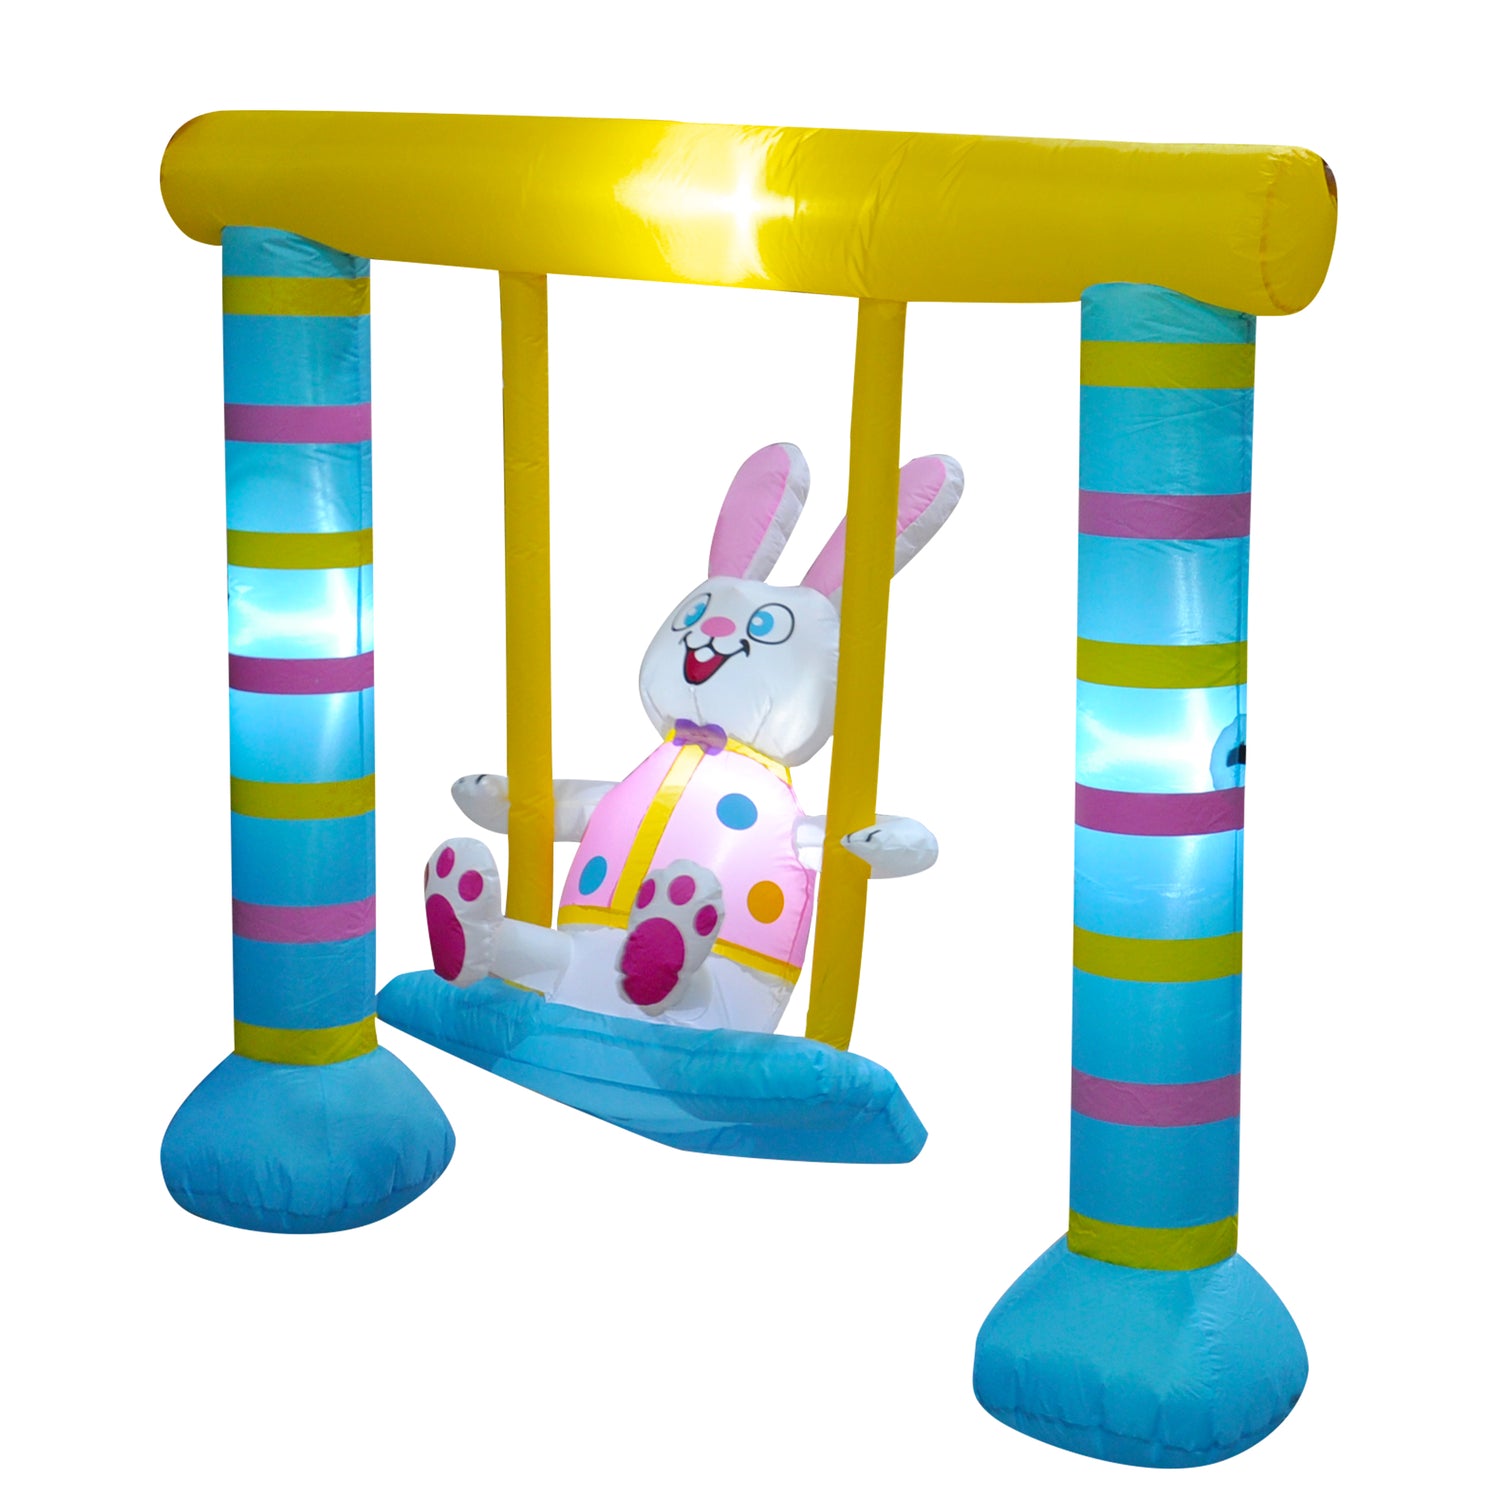 5 Ft SEASONBLOW Inflatable Easter Bunny Decorations.